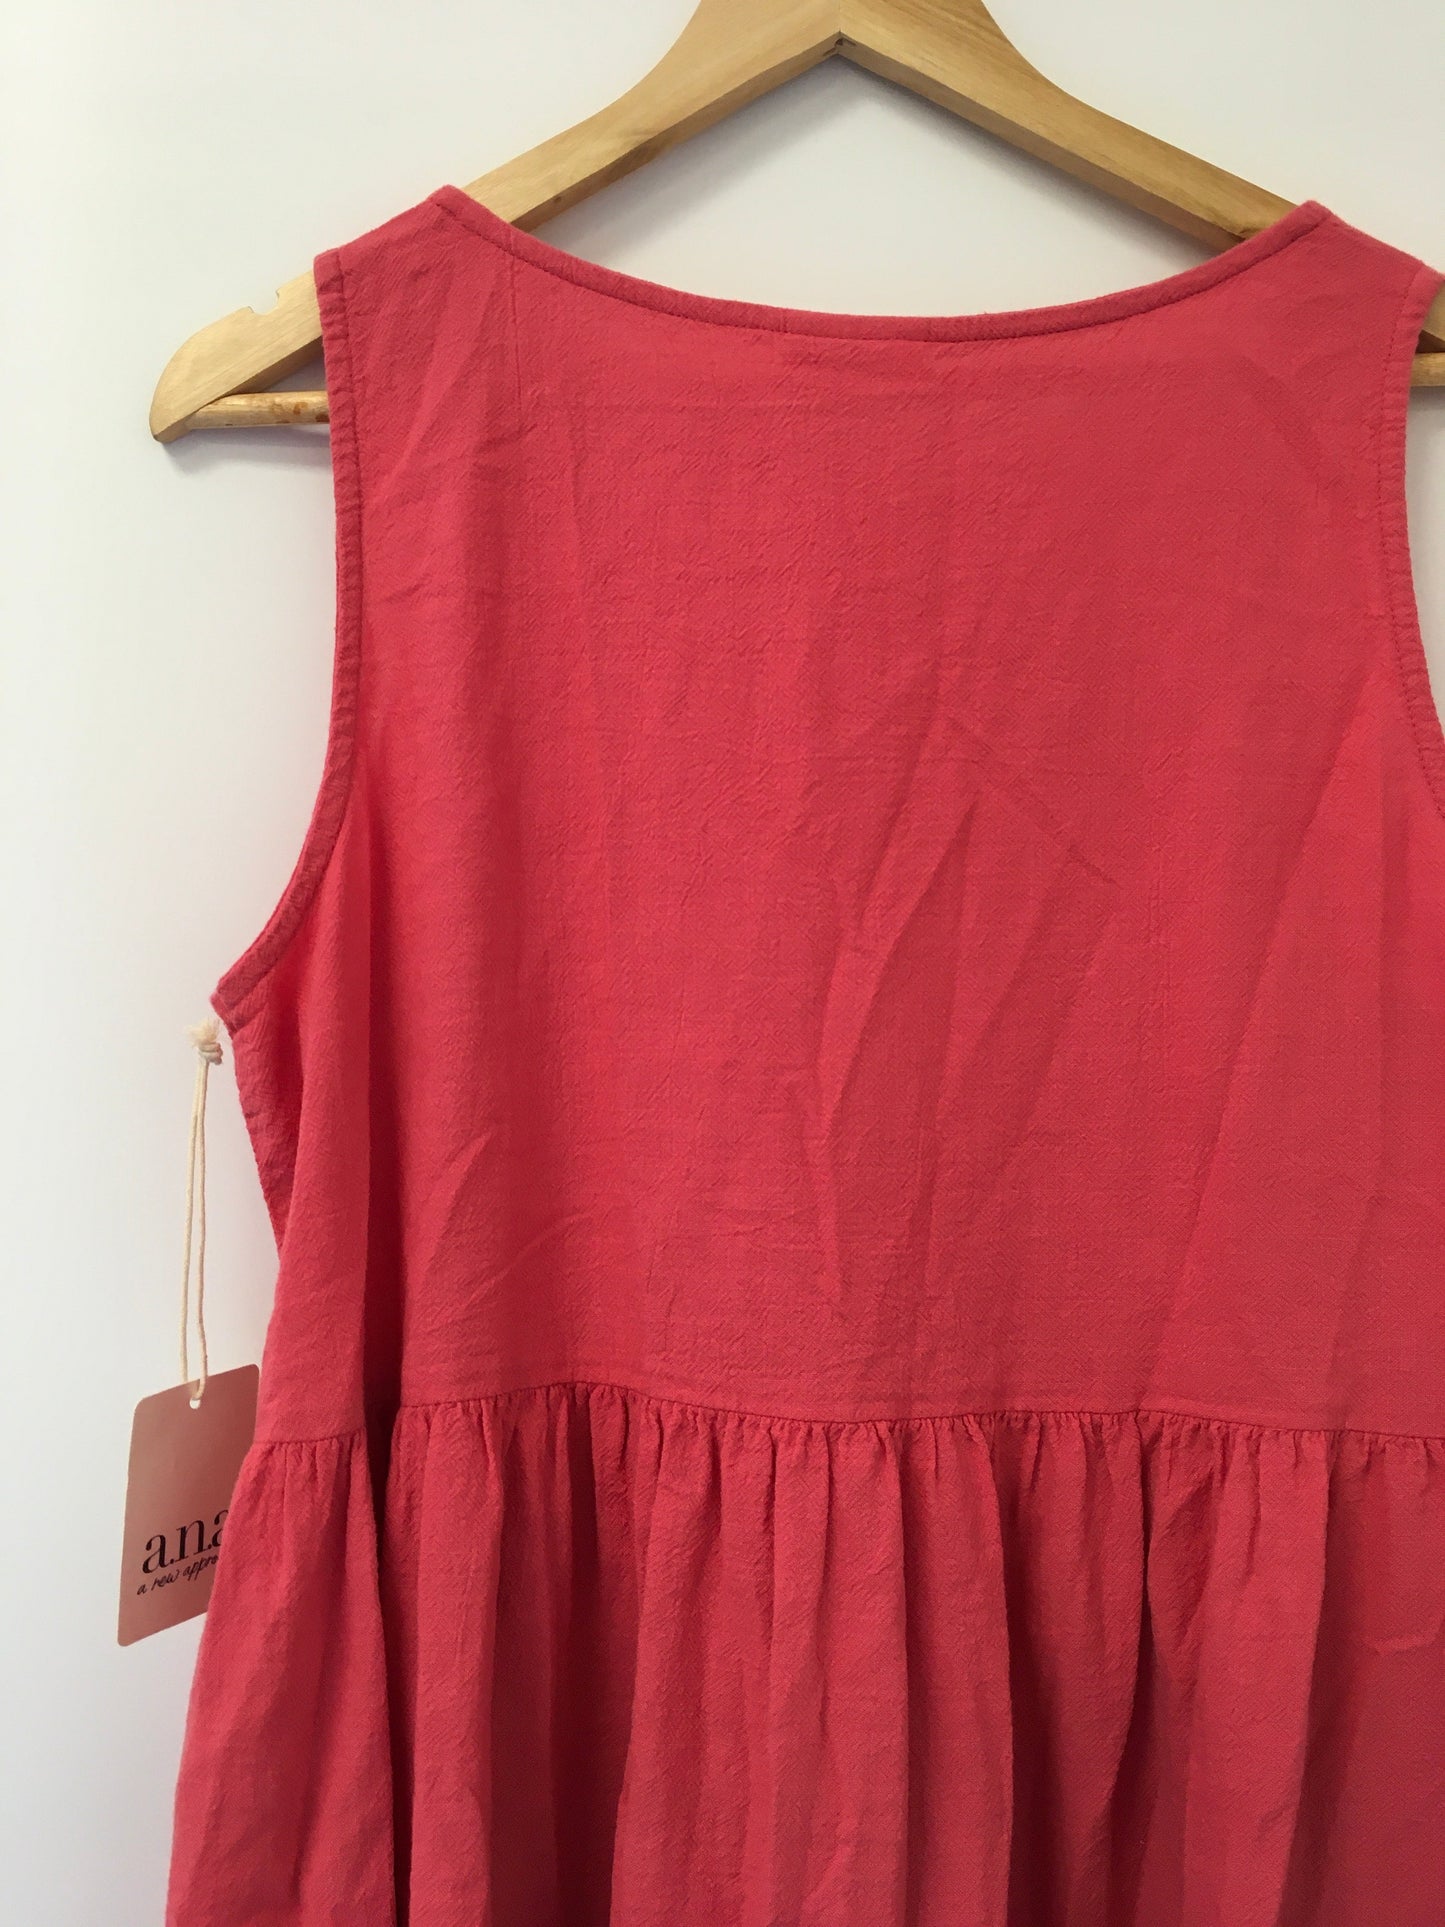 Dress Casual Short By Ana  Size: M